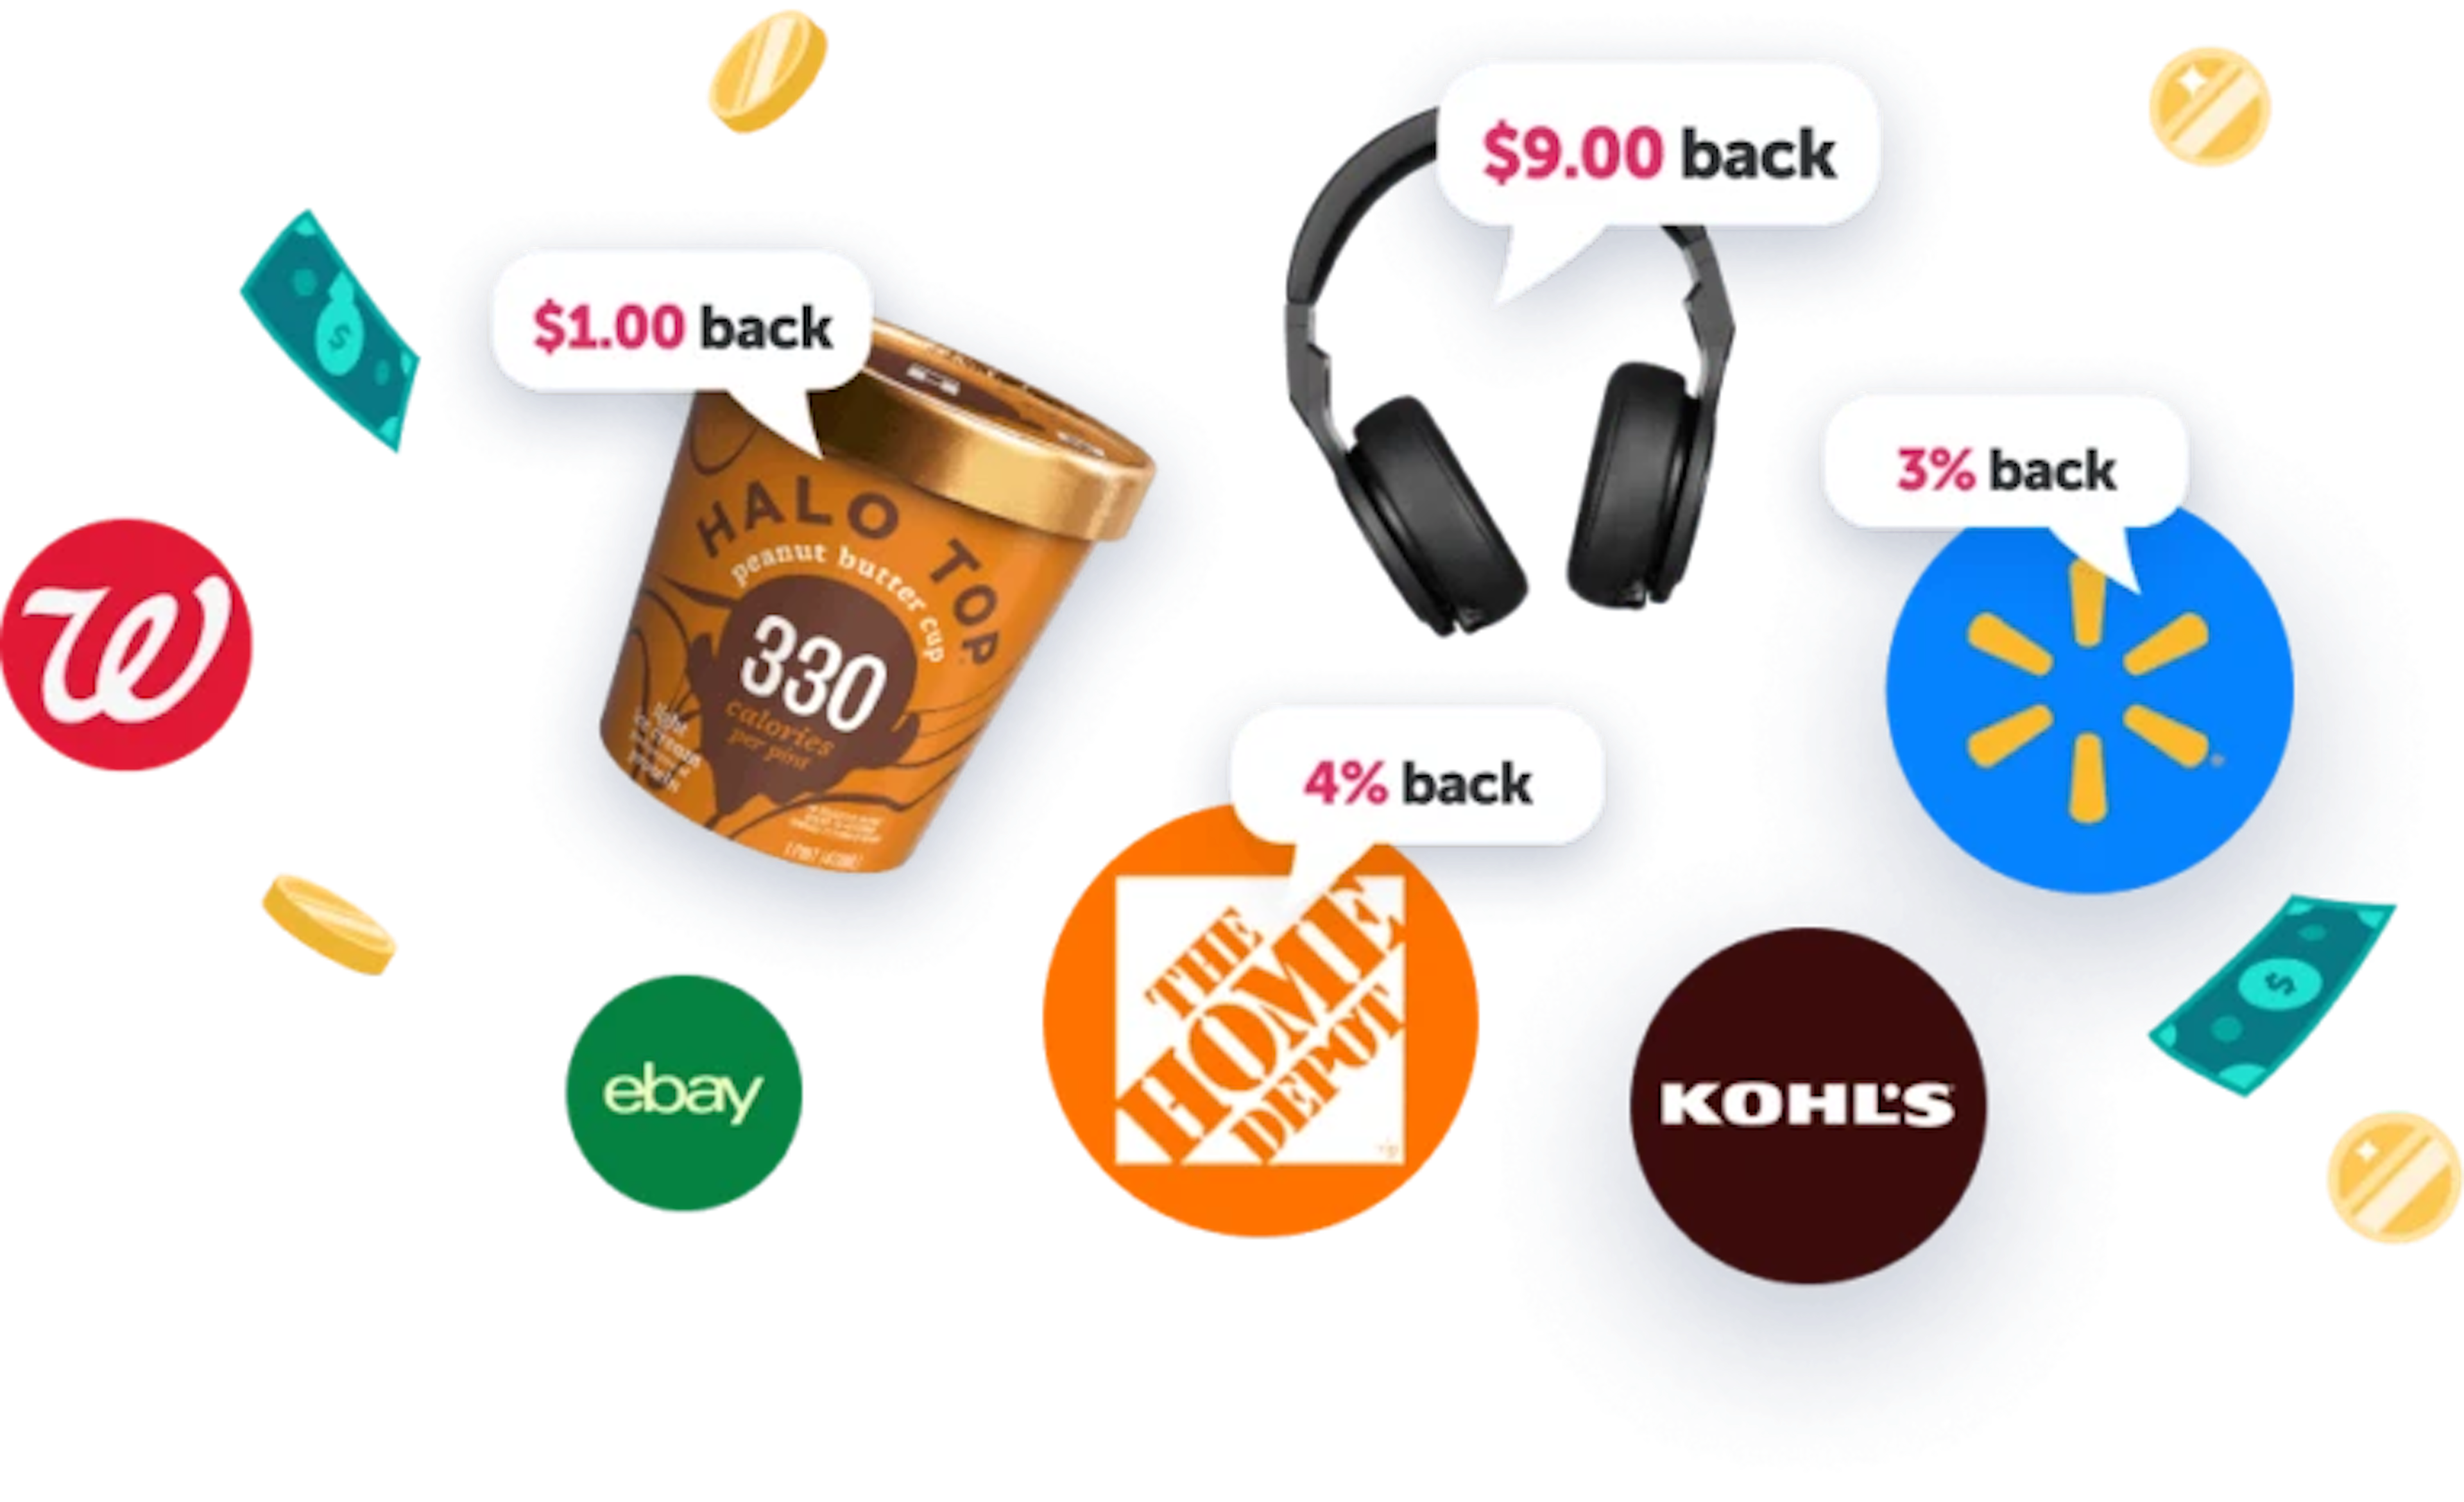 home-retailers-and-offers-with-cash-back-768x468